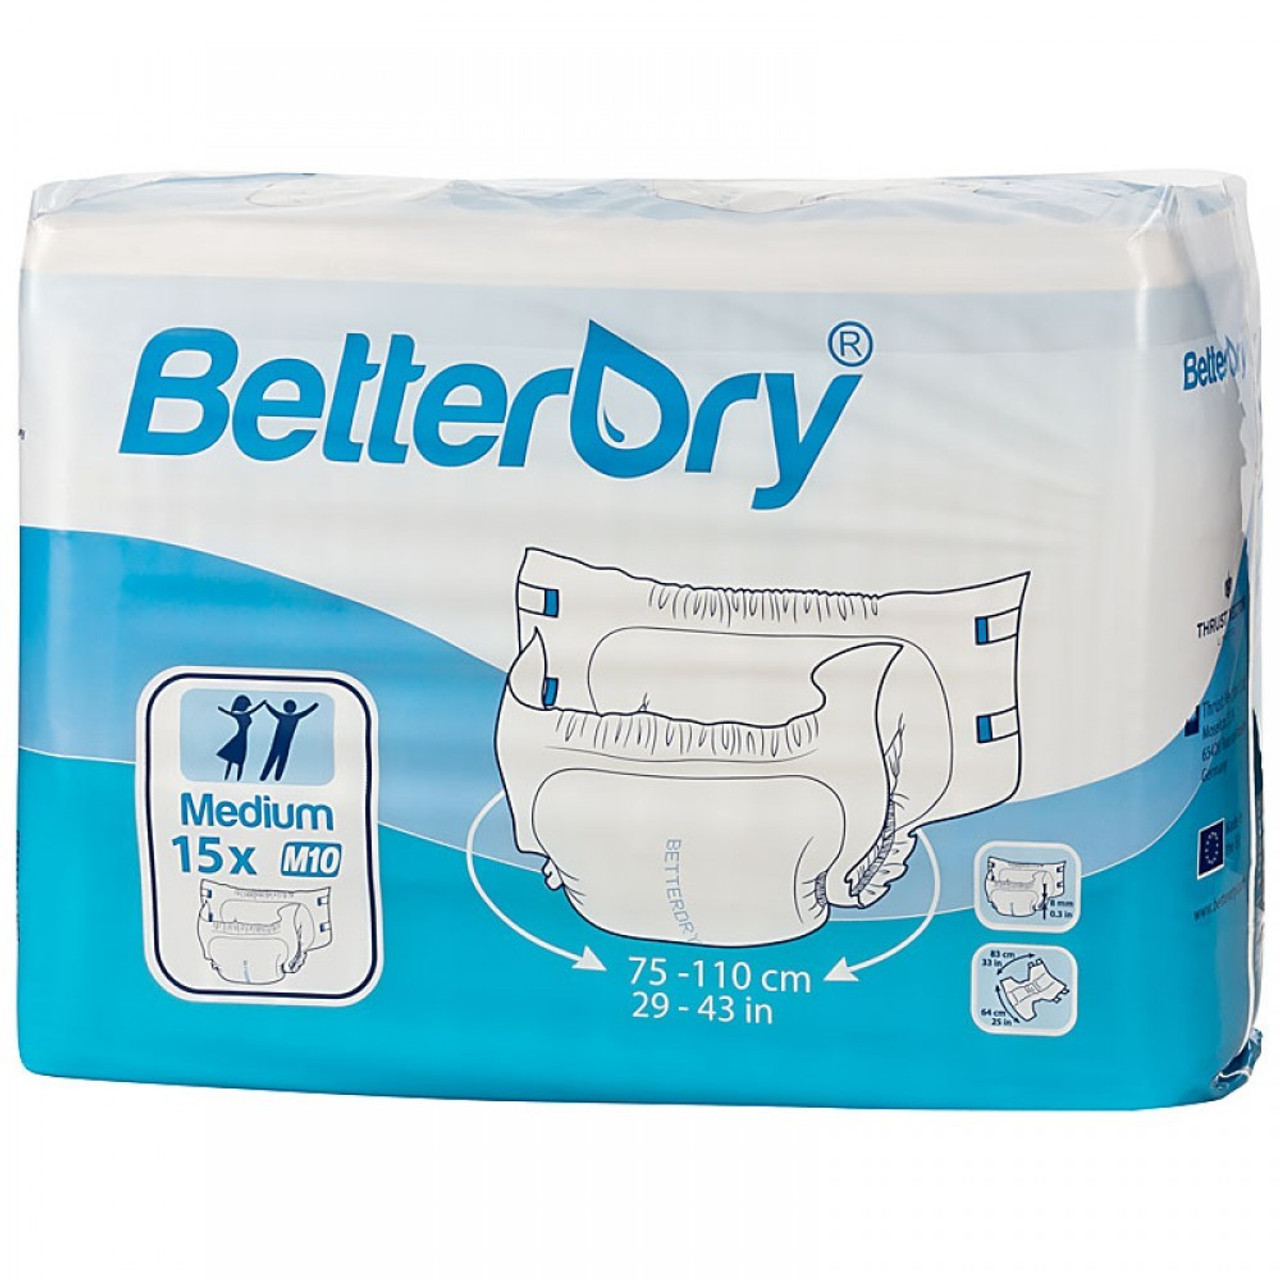 Adult Diaper XL Size – Home Health Care